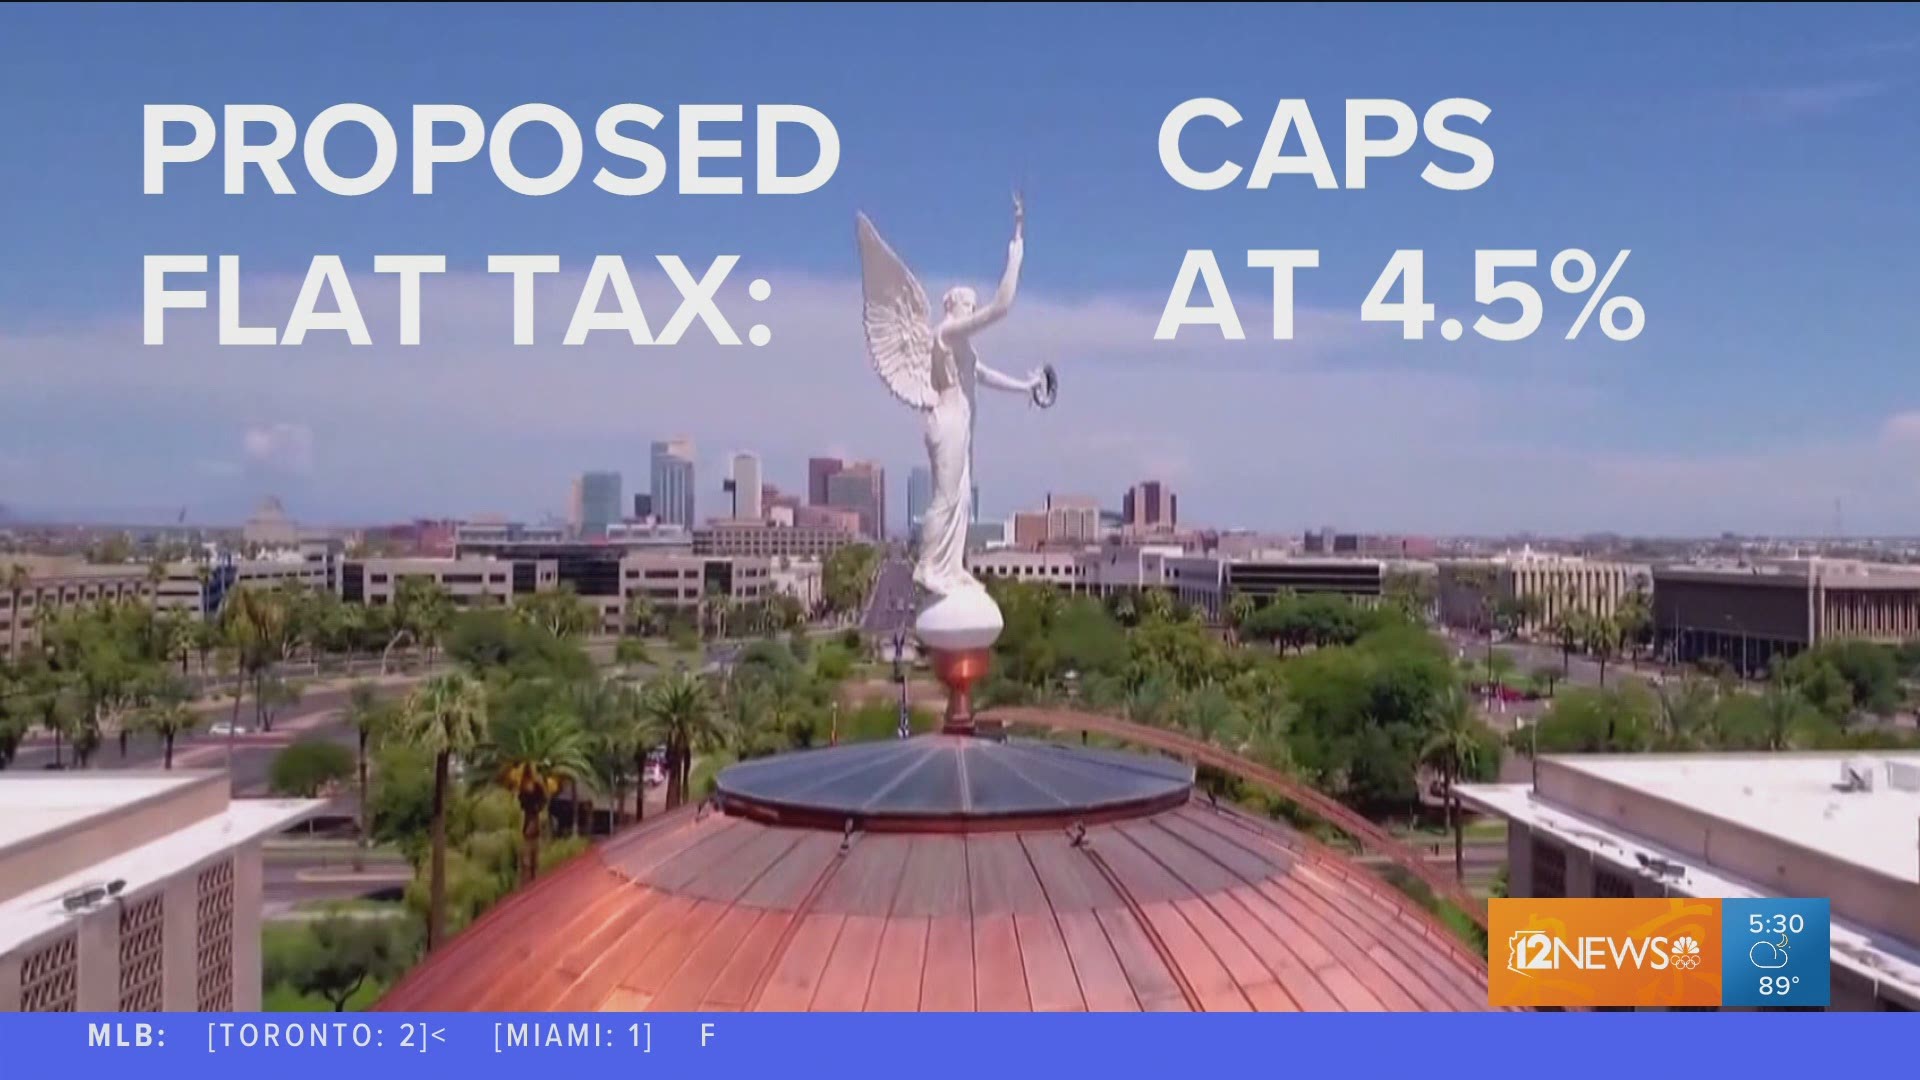 The purposed flat tax caps the income tax rate at 4.5% for the state's highest earners, which Arizona Democrats argue mainly helps the wealthy.